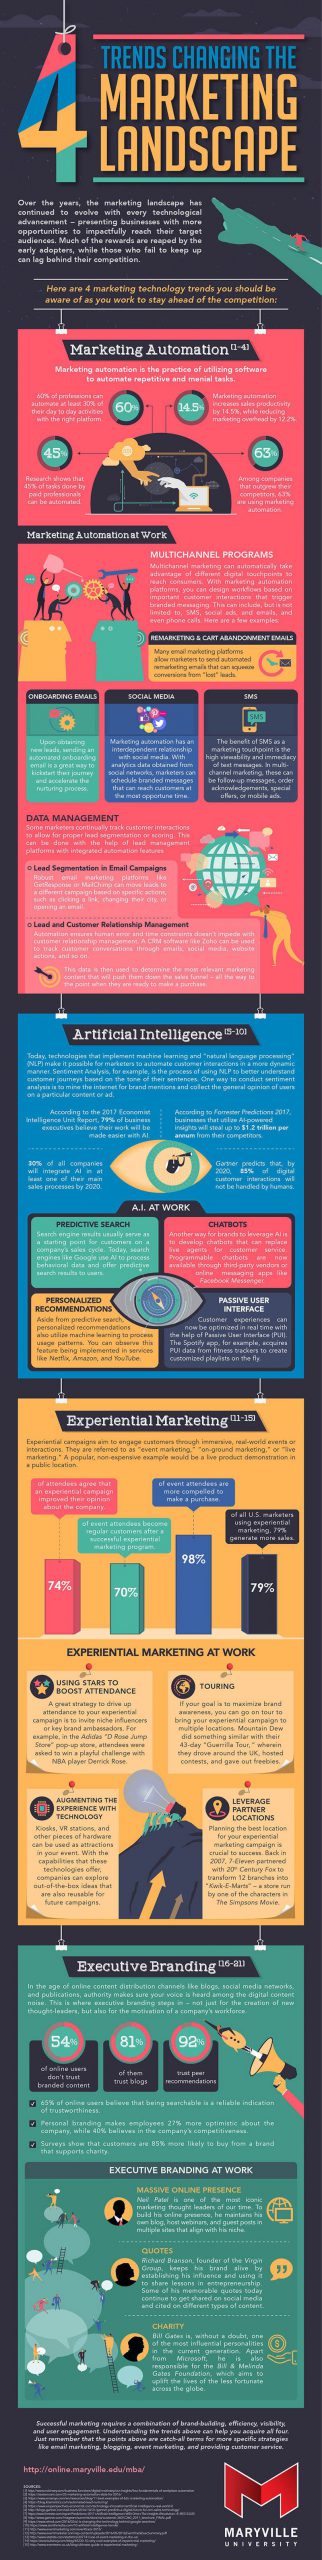 4 trends changing the marketing landscape in 2020 beyond infographic scaled 1